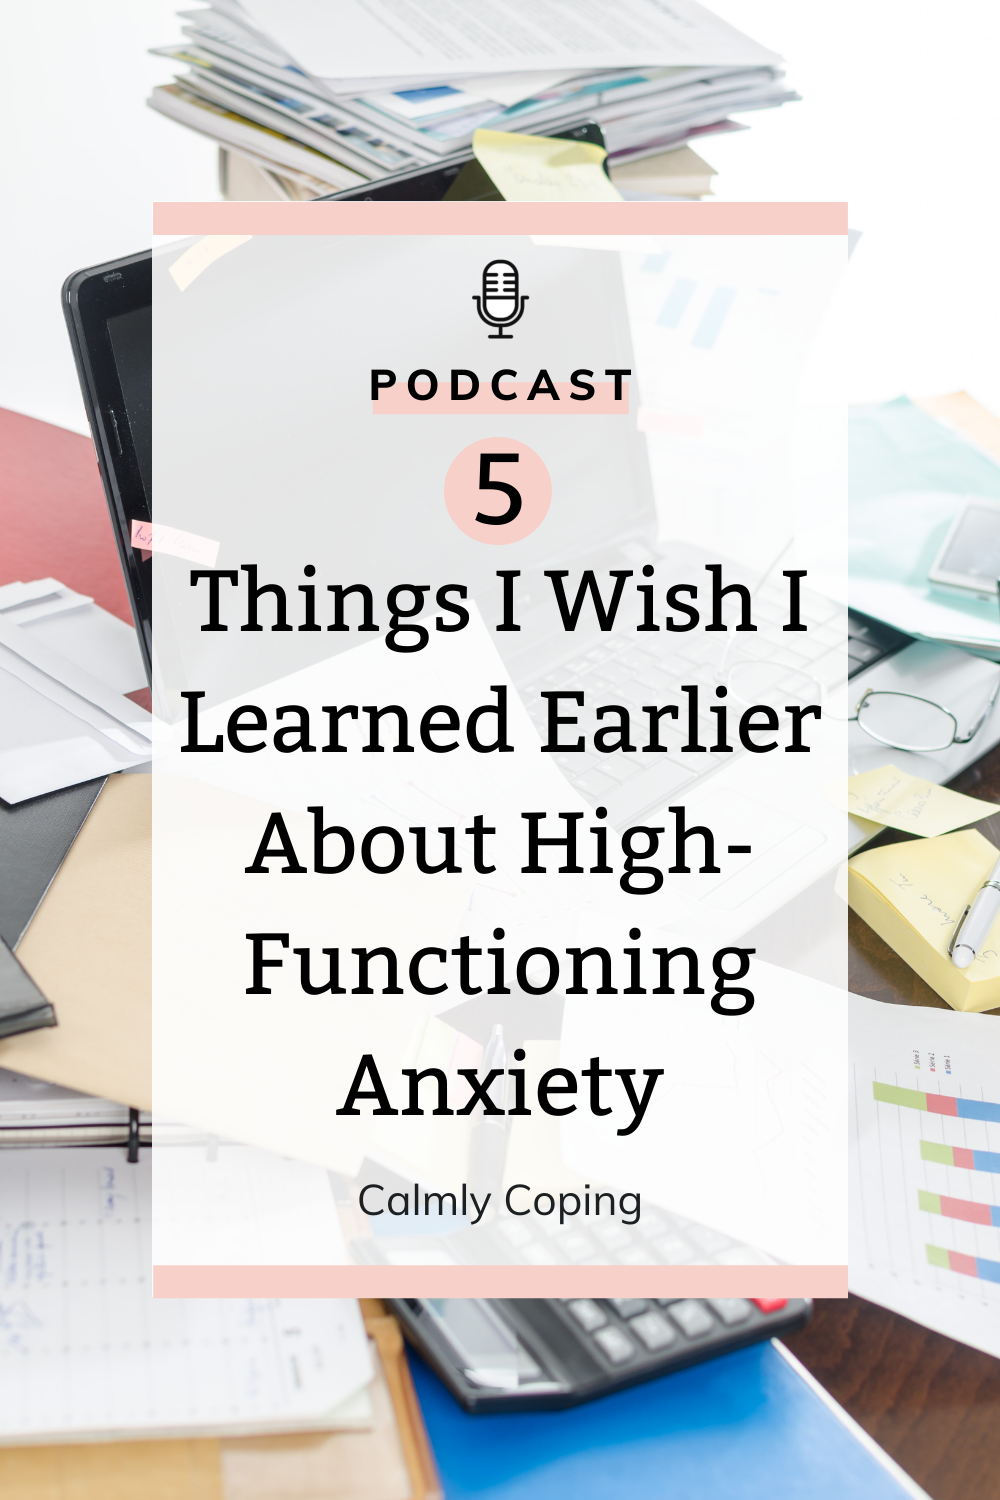 5 Things I Wish I Learned Earlier About High-Functioning Anxiety